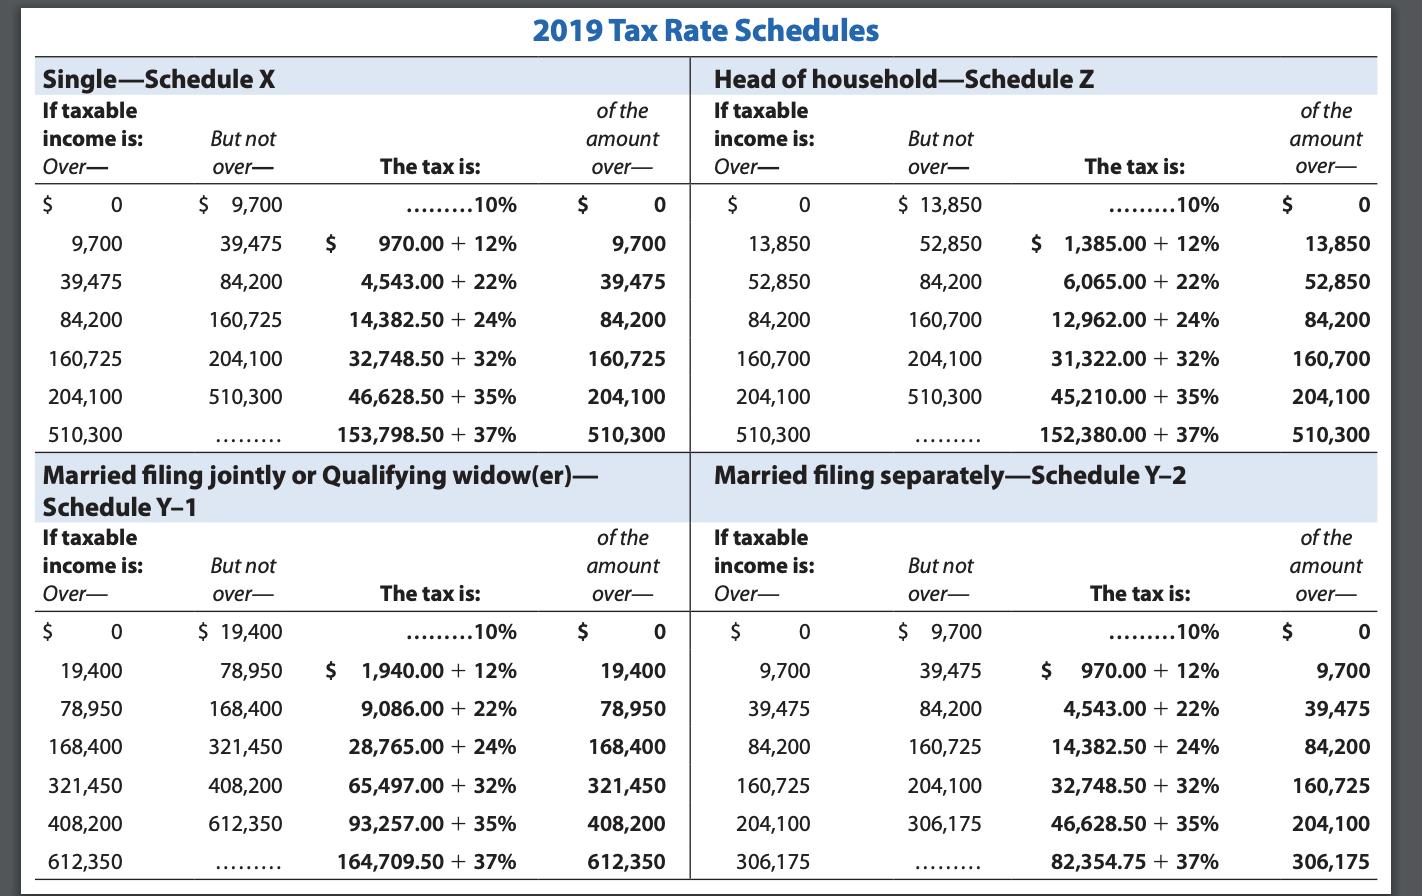 2019 Tax Rate Schedules Single-Schedule X If taxable income is: But not Over- over- of the amount Head of household—Schedule